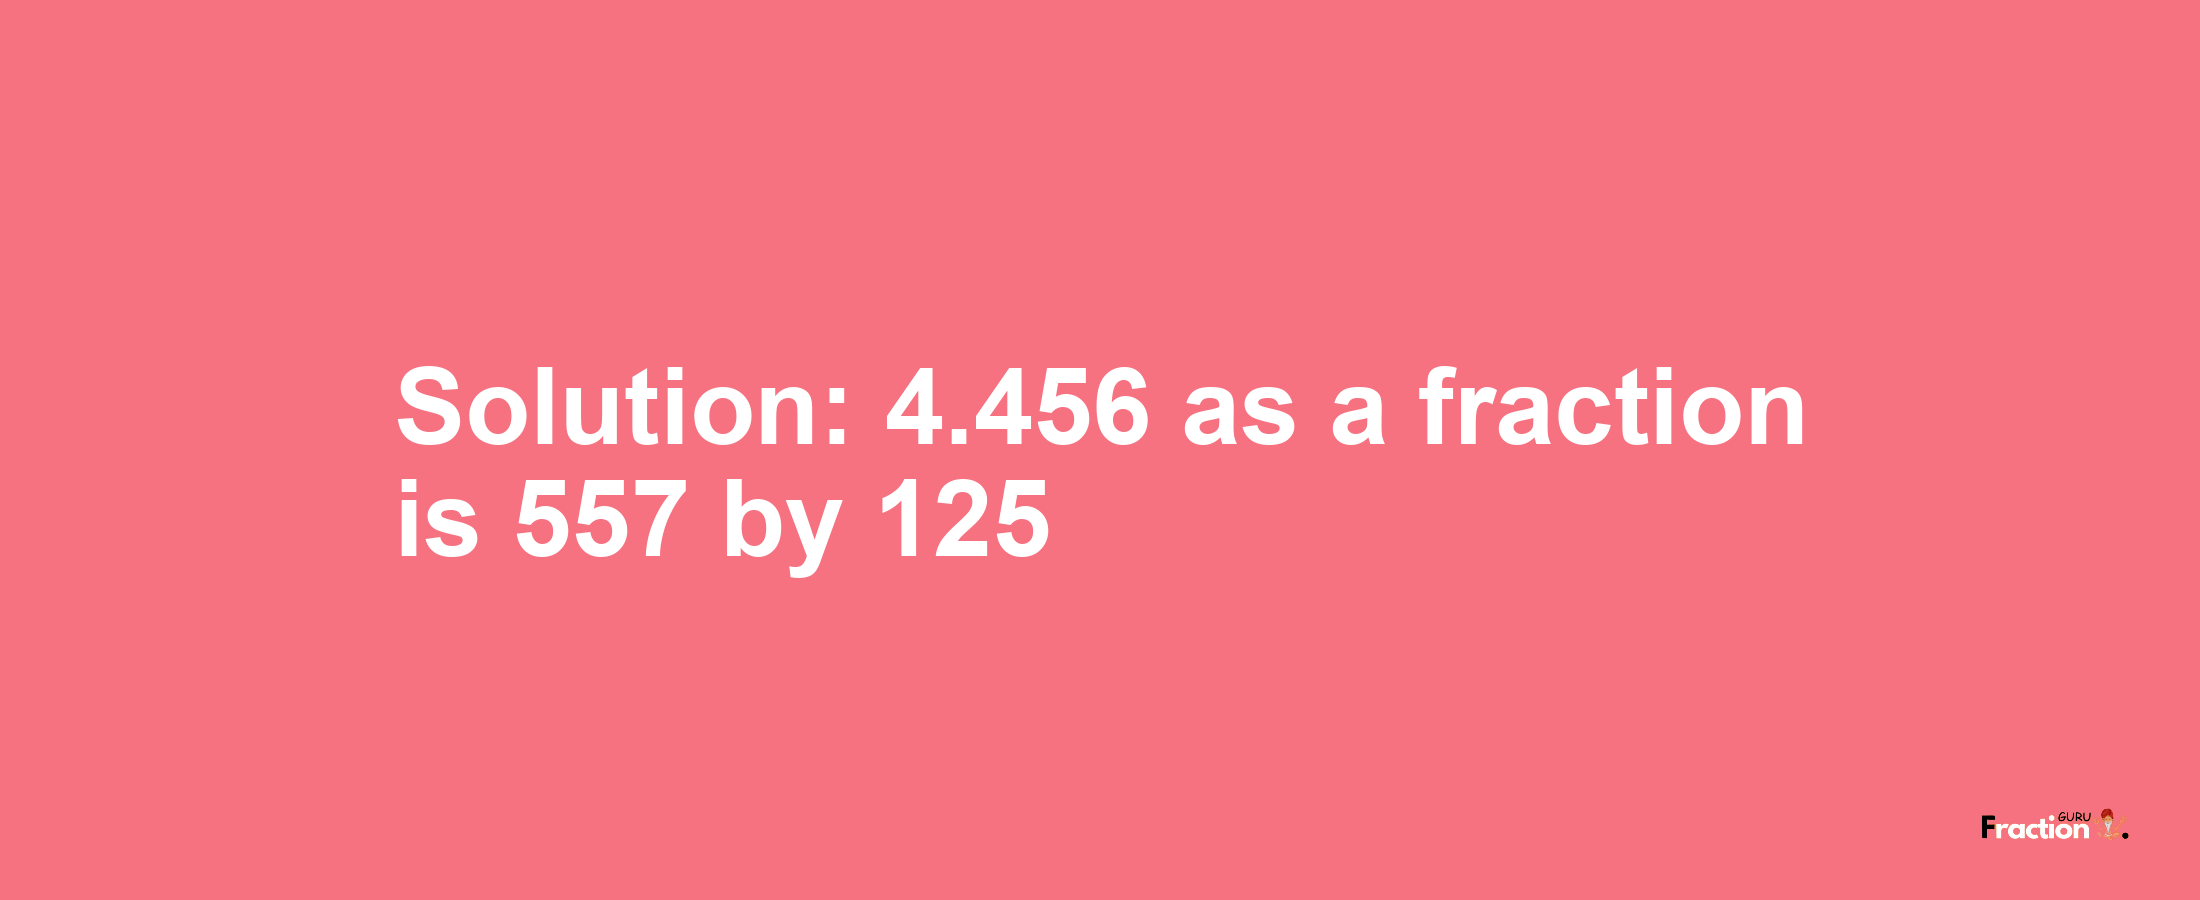 Solution:4.456 as a fraction is 557/125